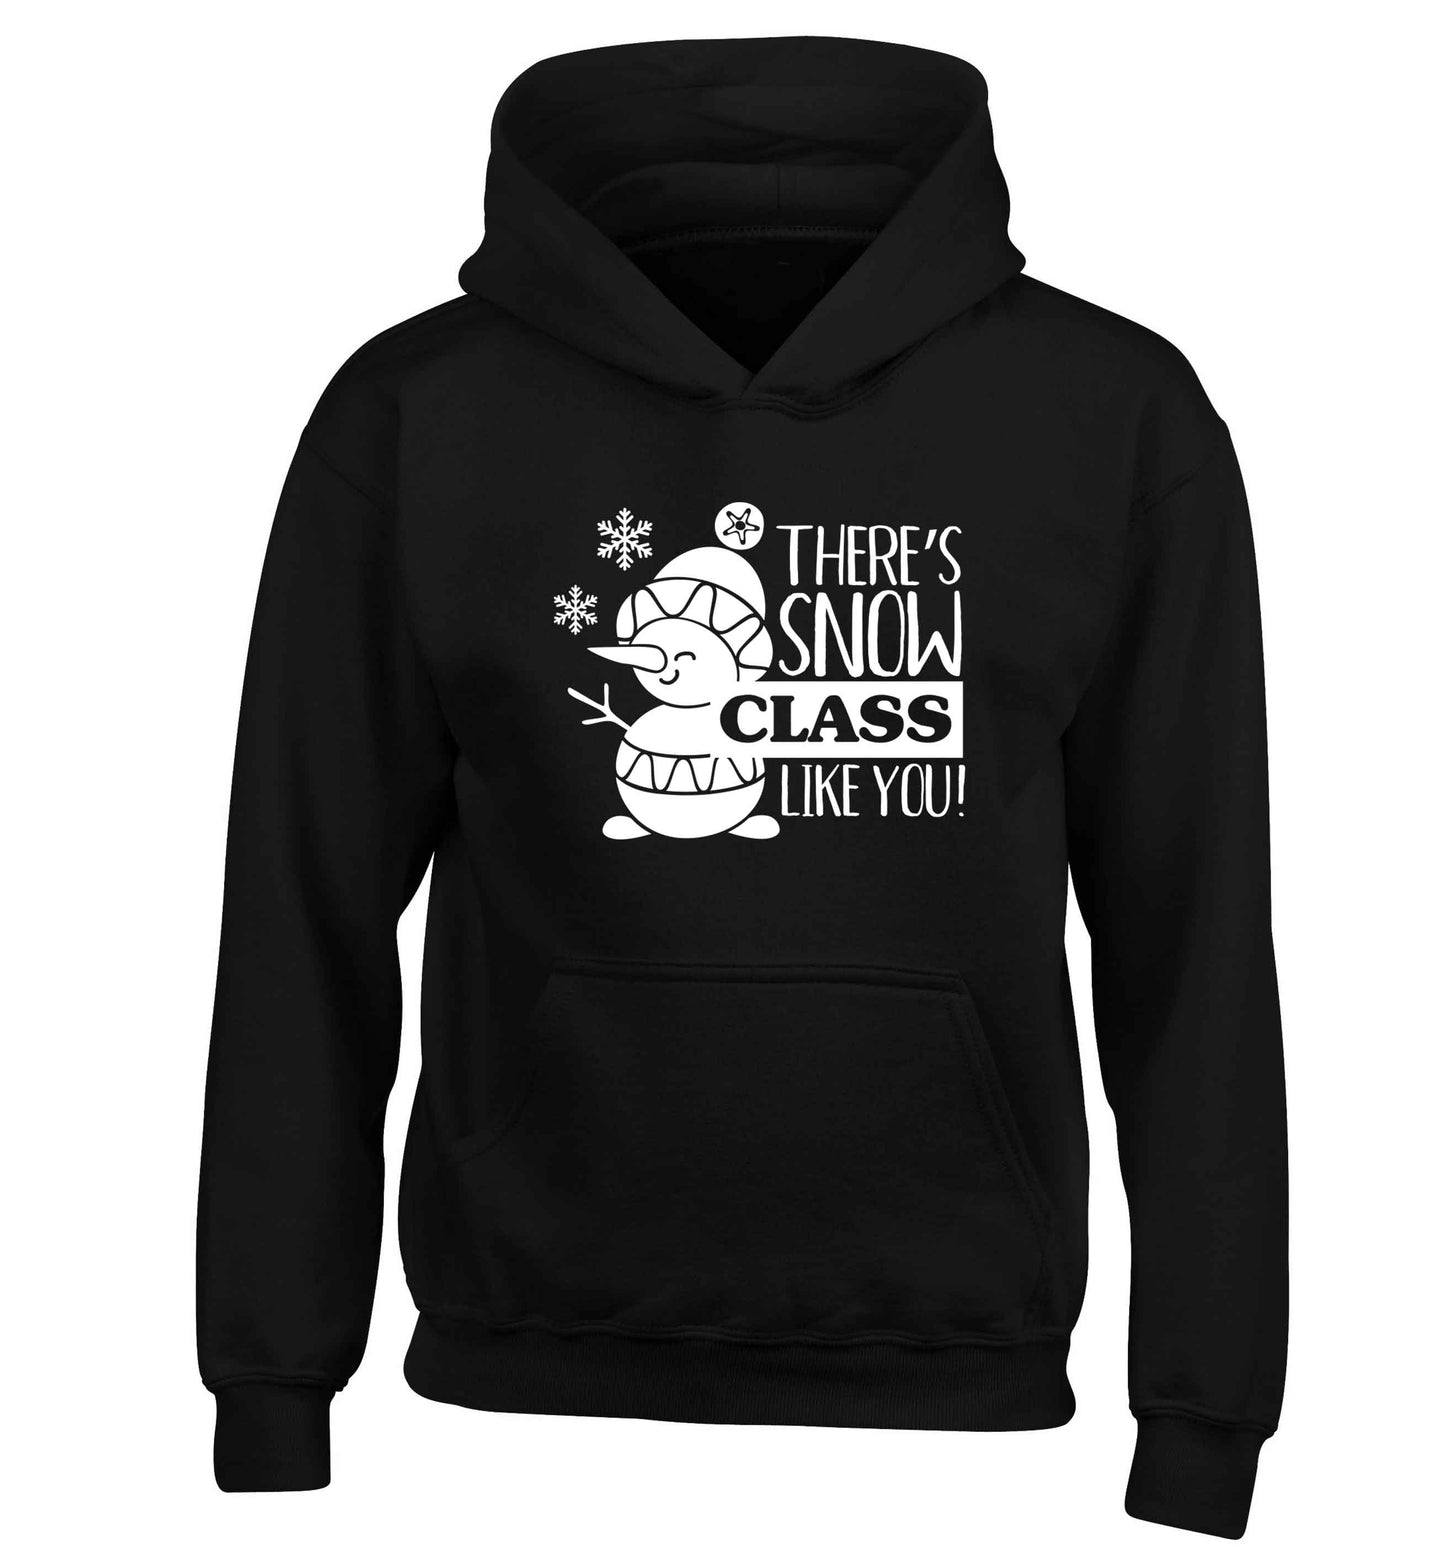 There's snow class like you children's black hoodie 12-13 Years